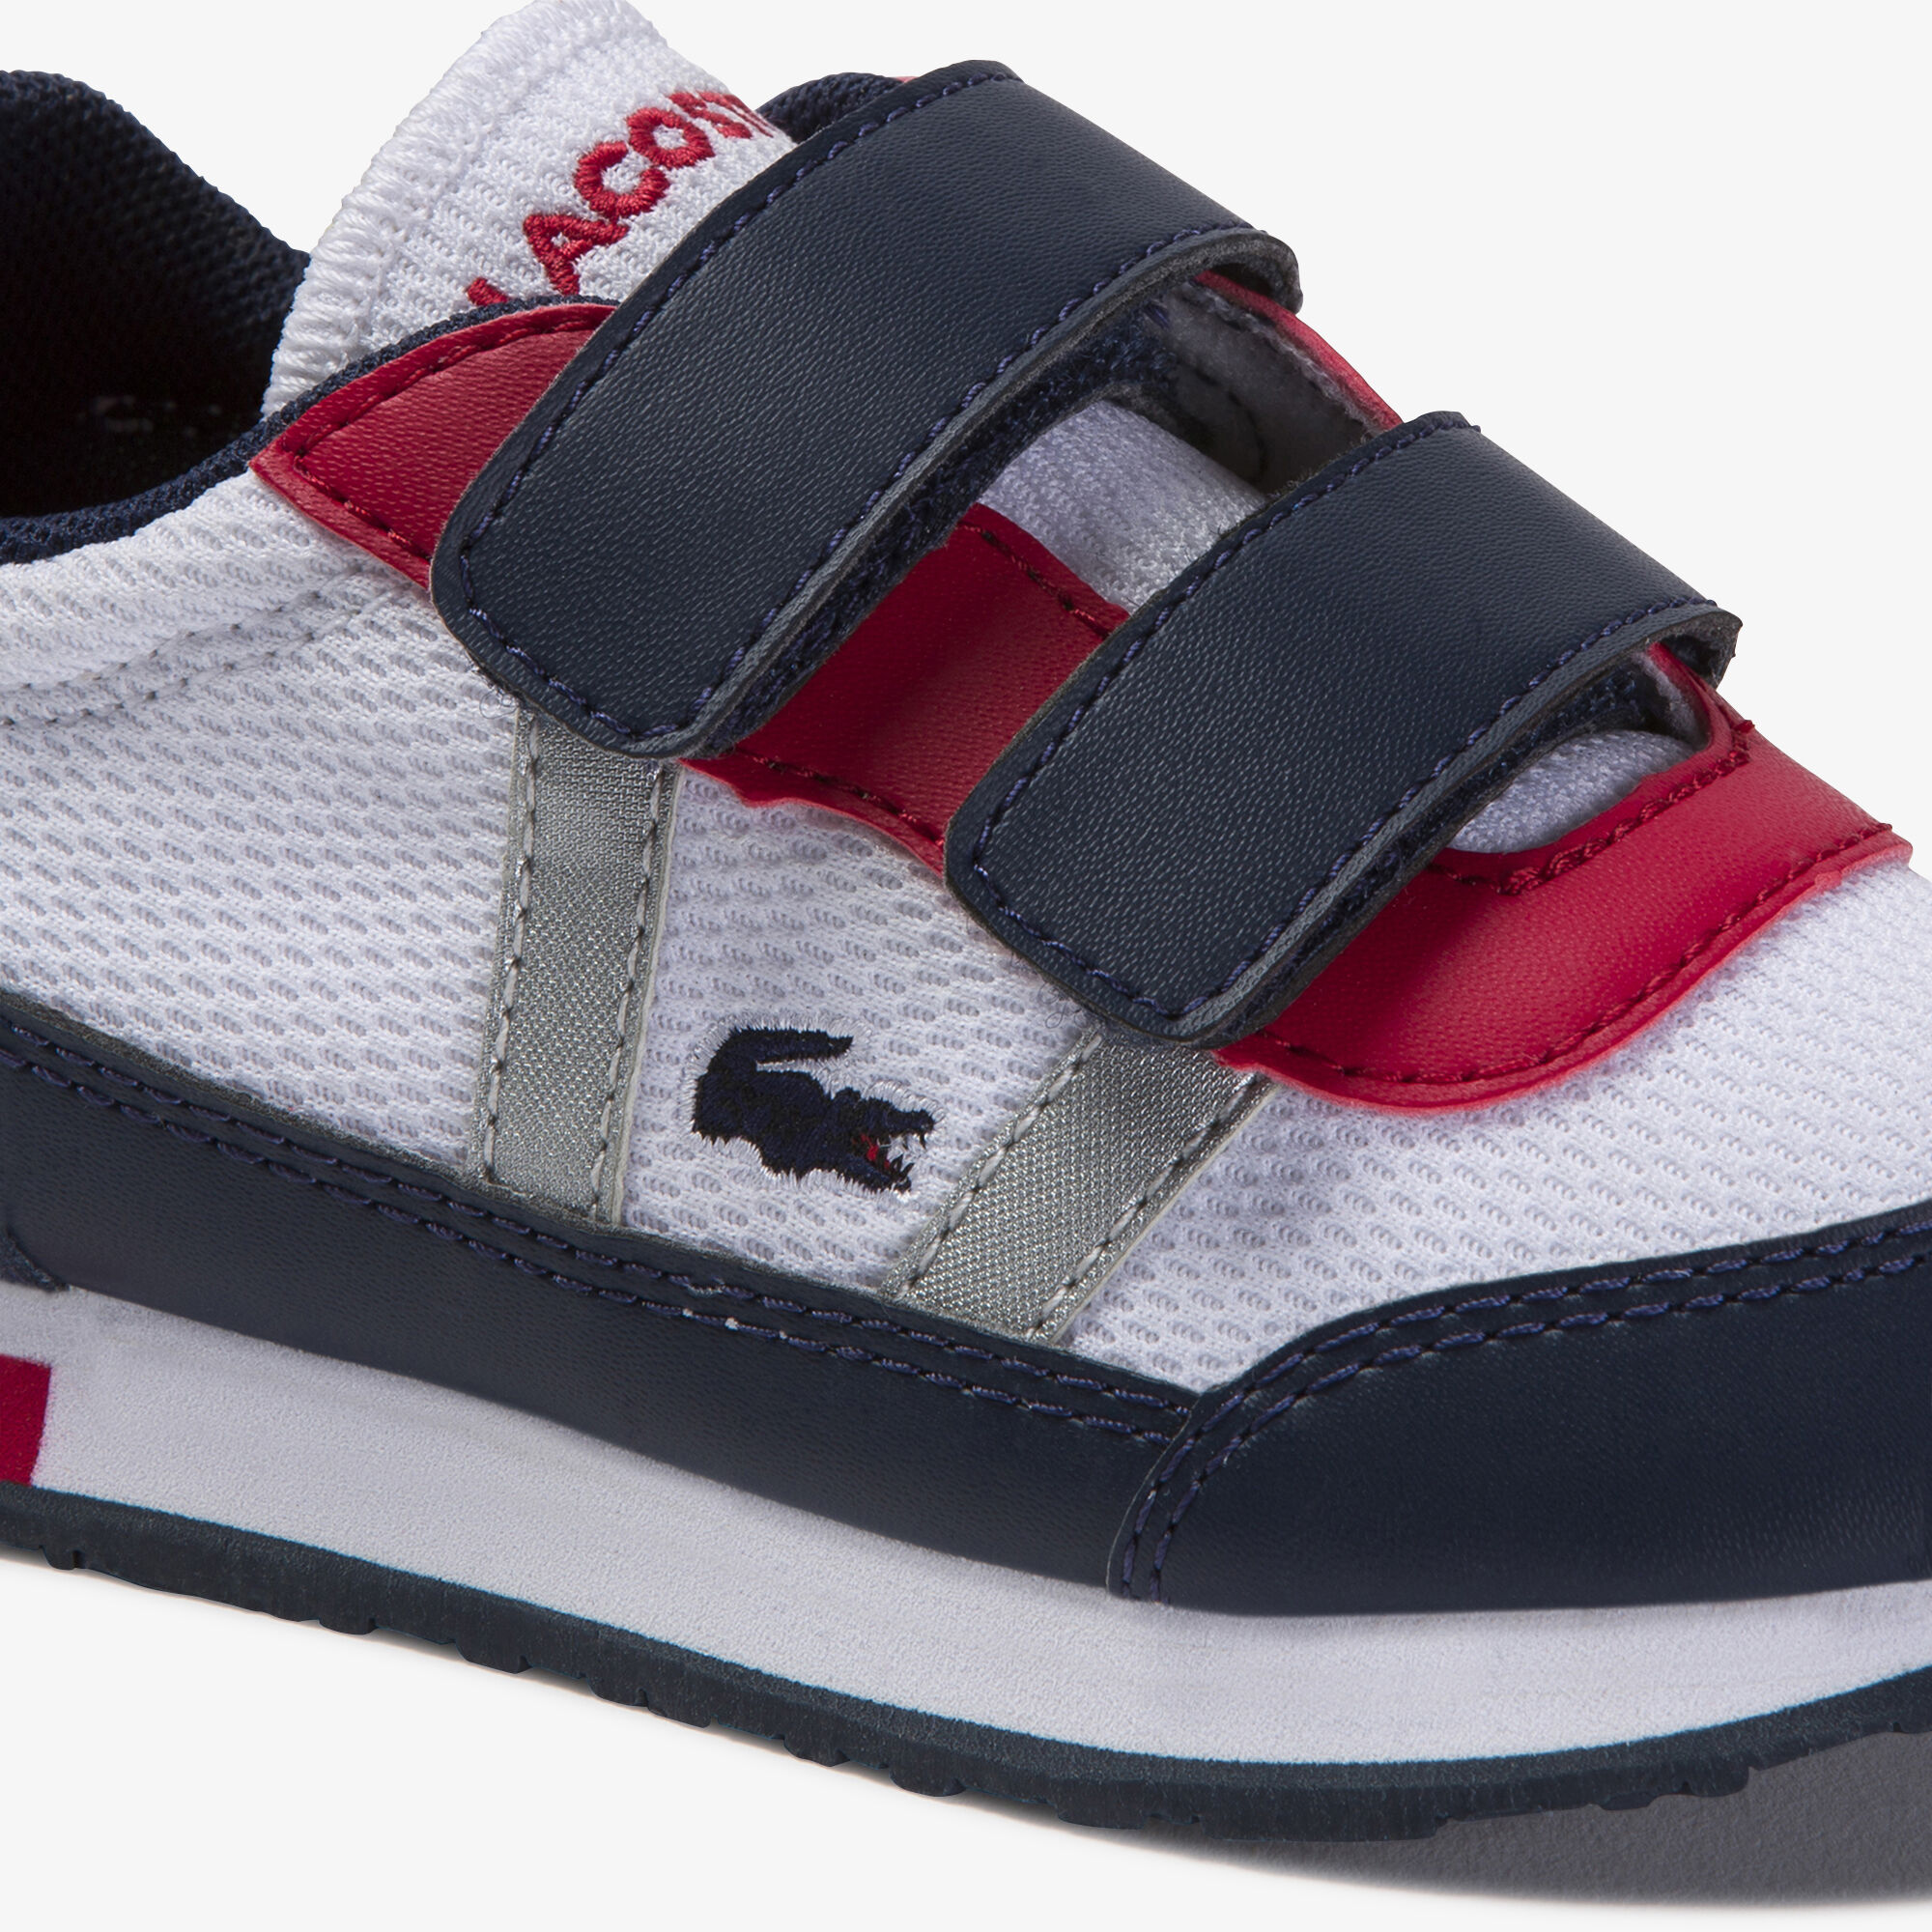 Infants' Partner Textile and Synthetic Sneakers